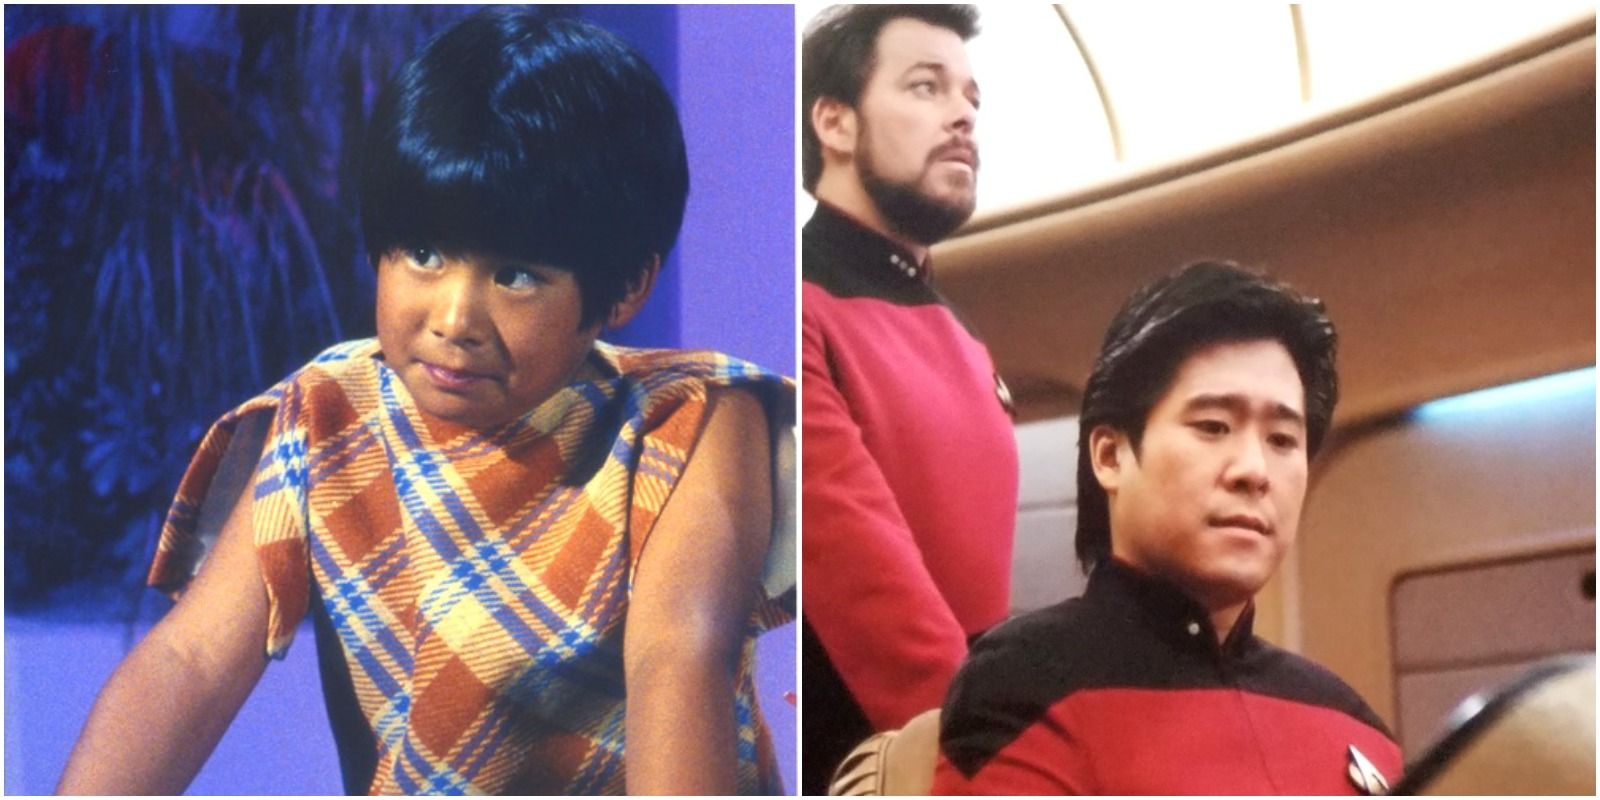 An Onlies and Ensign Lin aboard the Enterprise-D in TOS and TNG